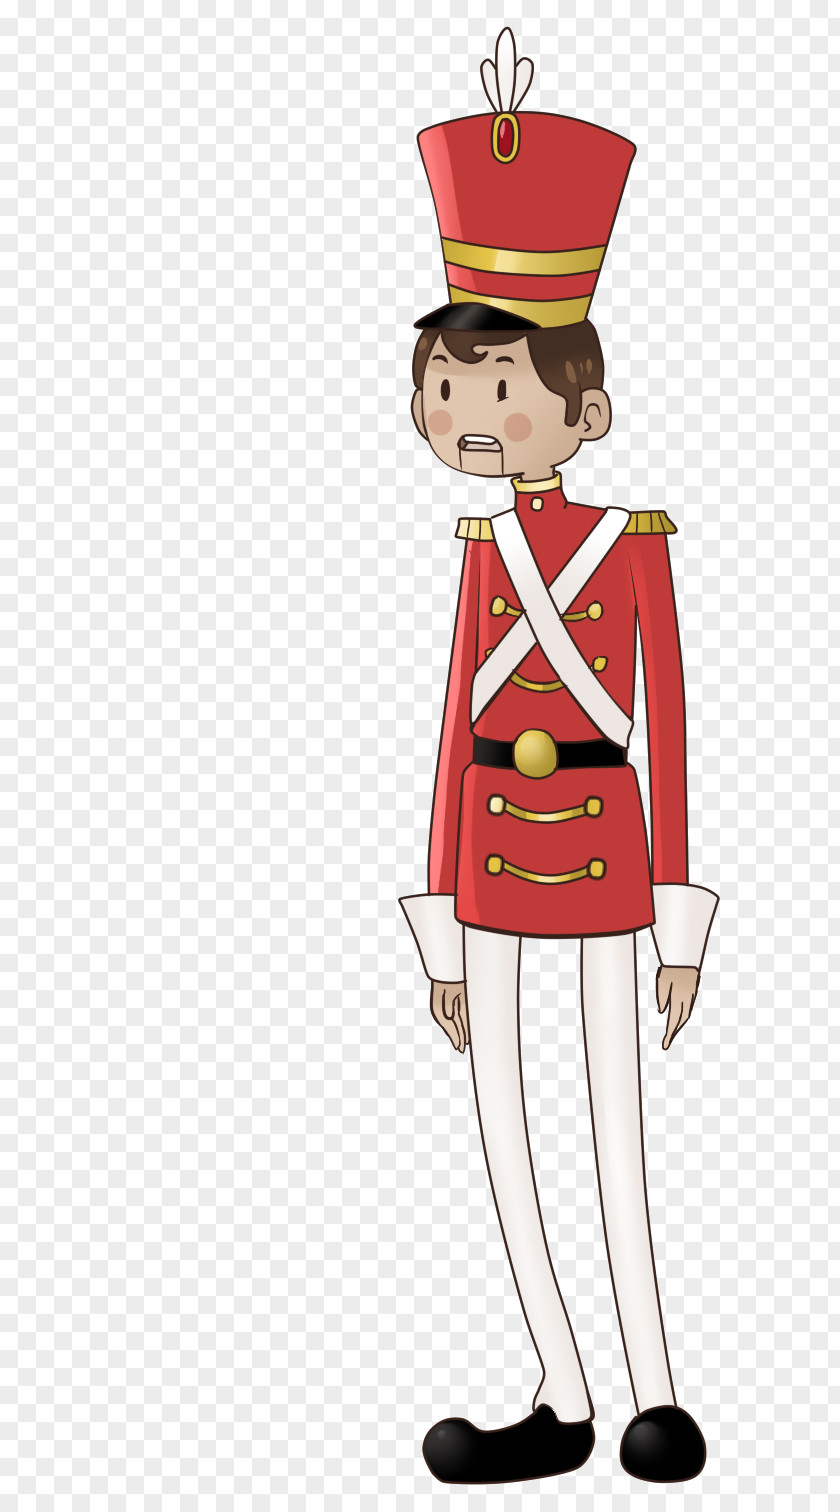 Toy Soldiers Costume Design Cartoon Character Uniform PNG